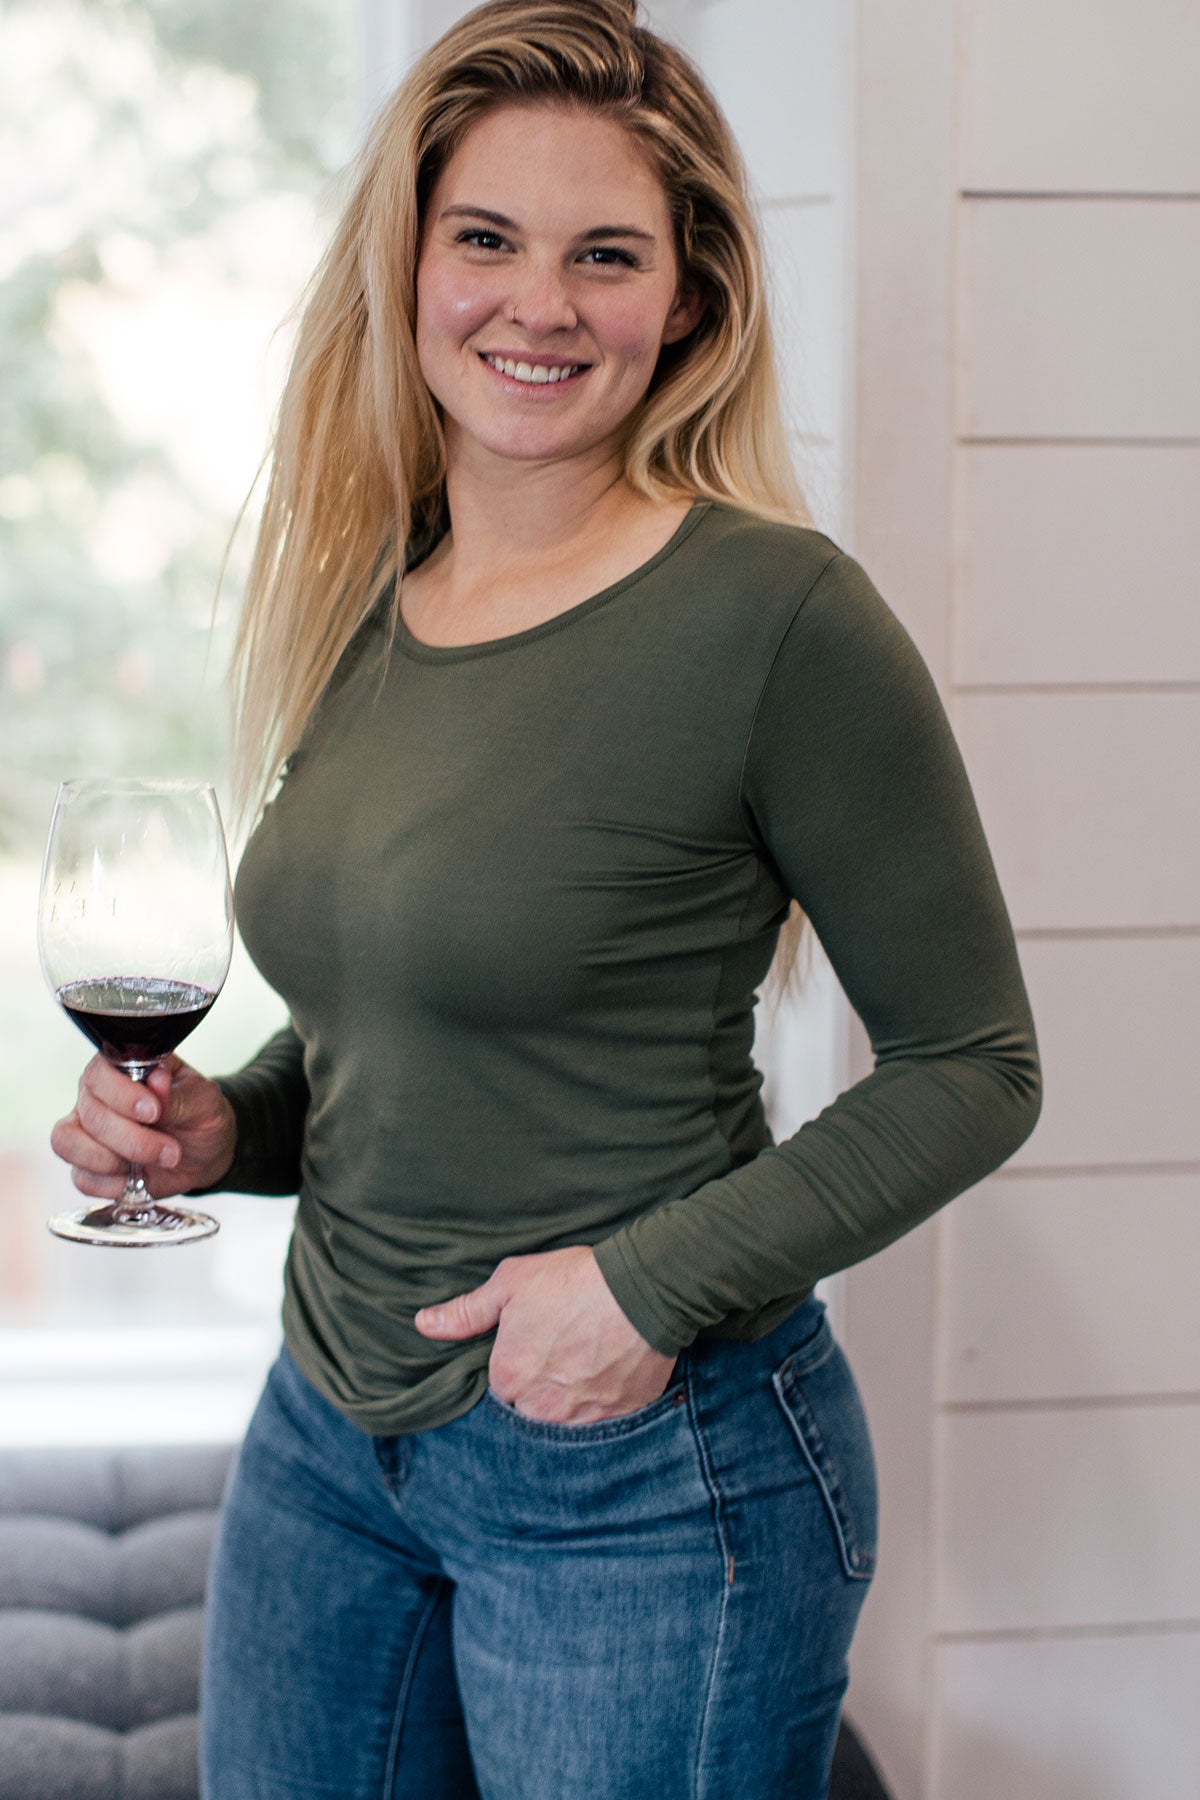 A woman standing and smiling with one hand in her pocket and the other holding a glass of wine, wearing Yala Natalie Long Sleeve Bamboo Crew Tee Shirt in Moss